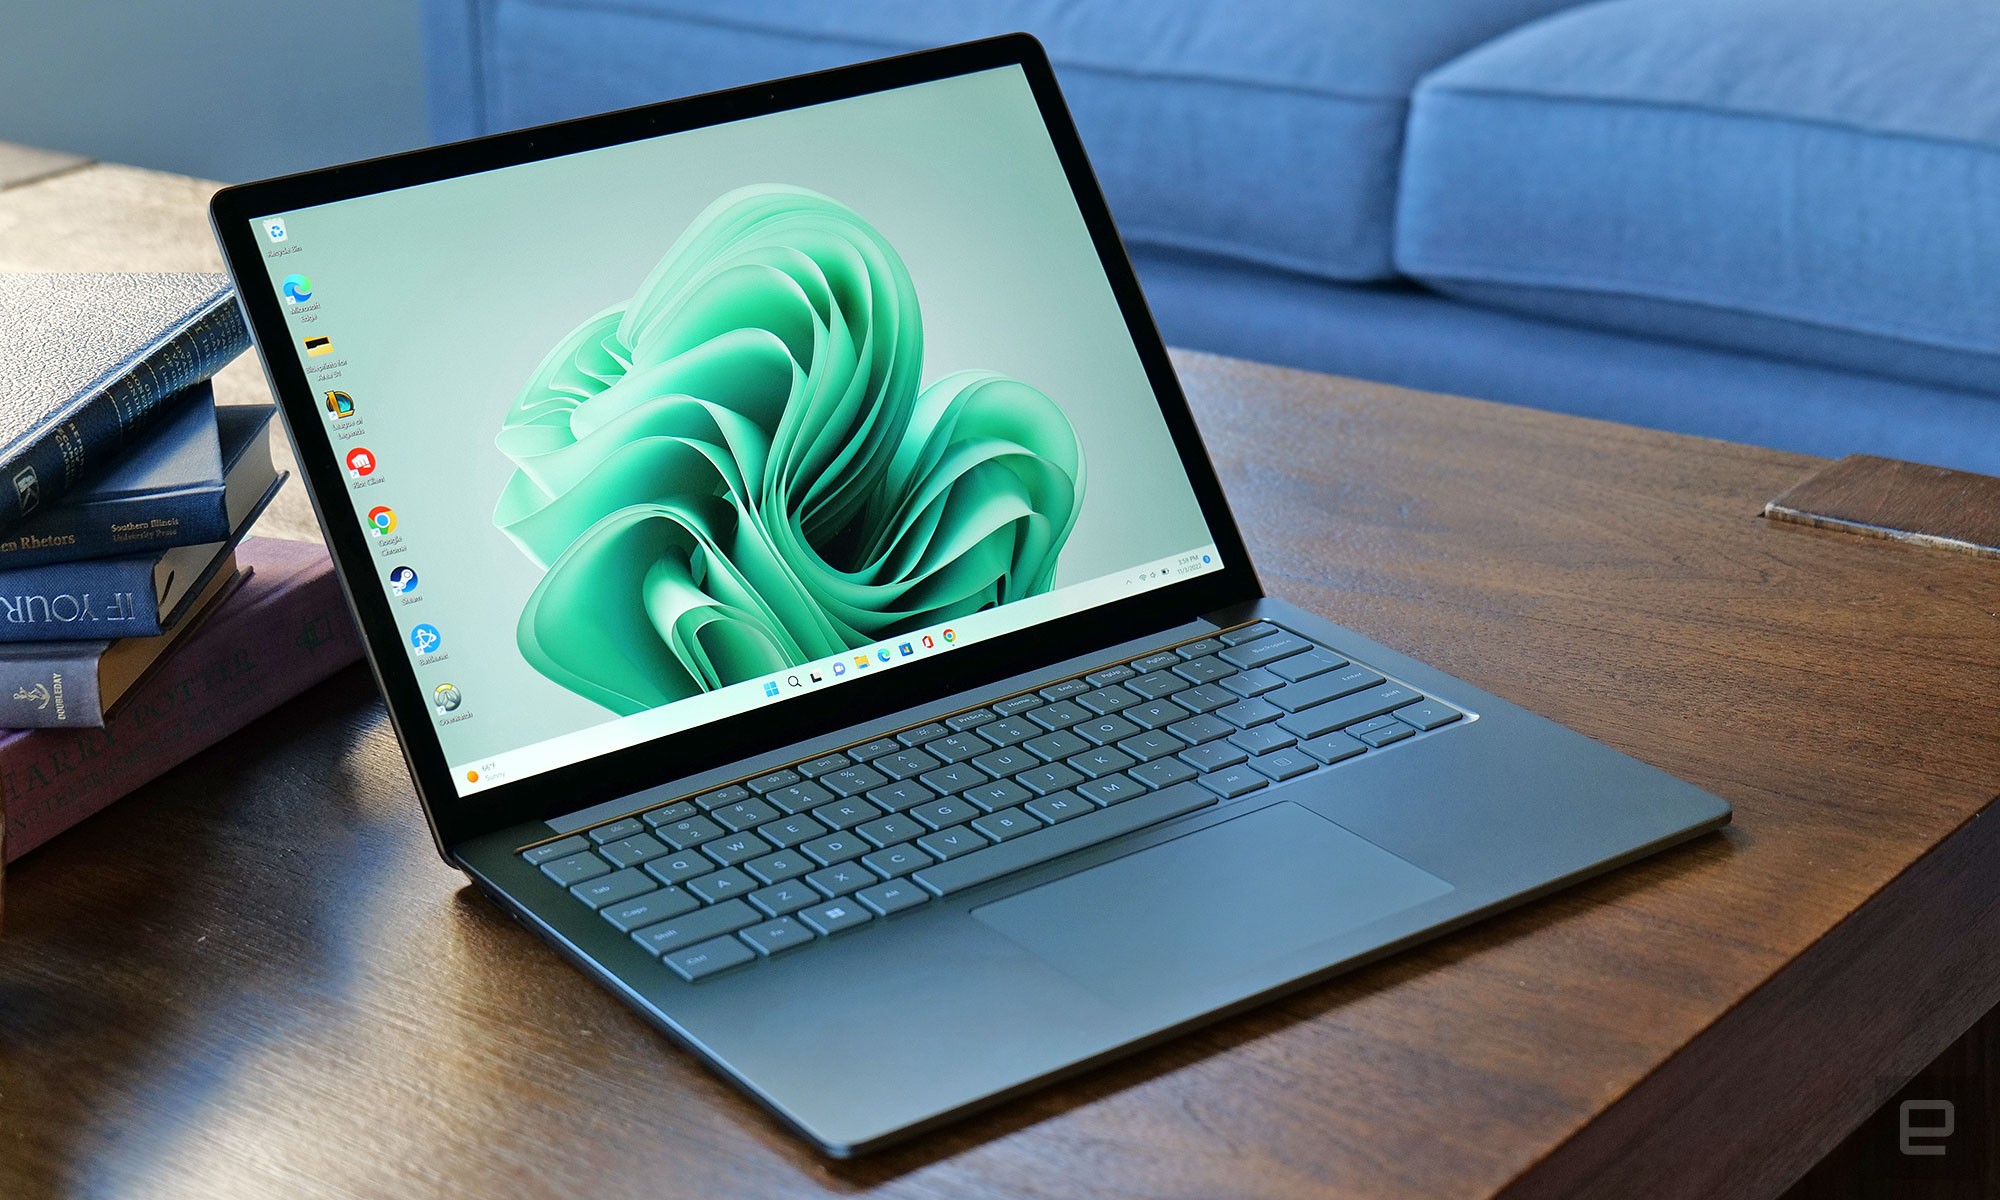 While the Surface Laptop 5 hasn’t gotten a lot of updates on the outside aside from a fresh sage green color option, support for faster 12th-gen Intel CPUs and a new Thunderbolt 4 port give it a big bump in speed and versatility." data-uuid="f0e869e8-e9e7-30b2-a046-4445d1d2e37d